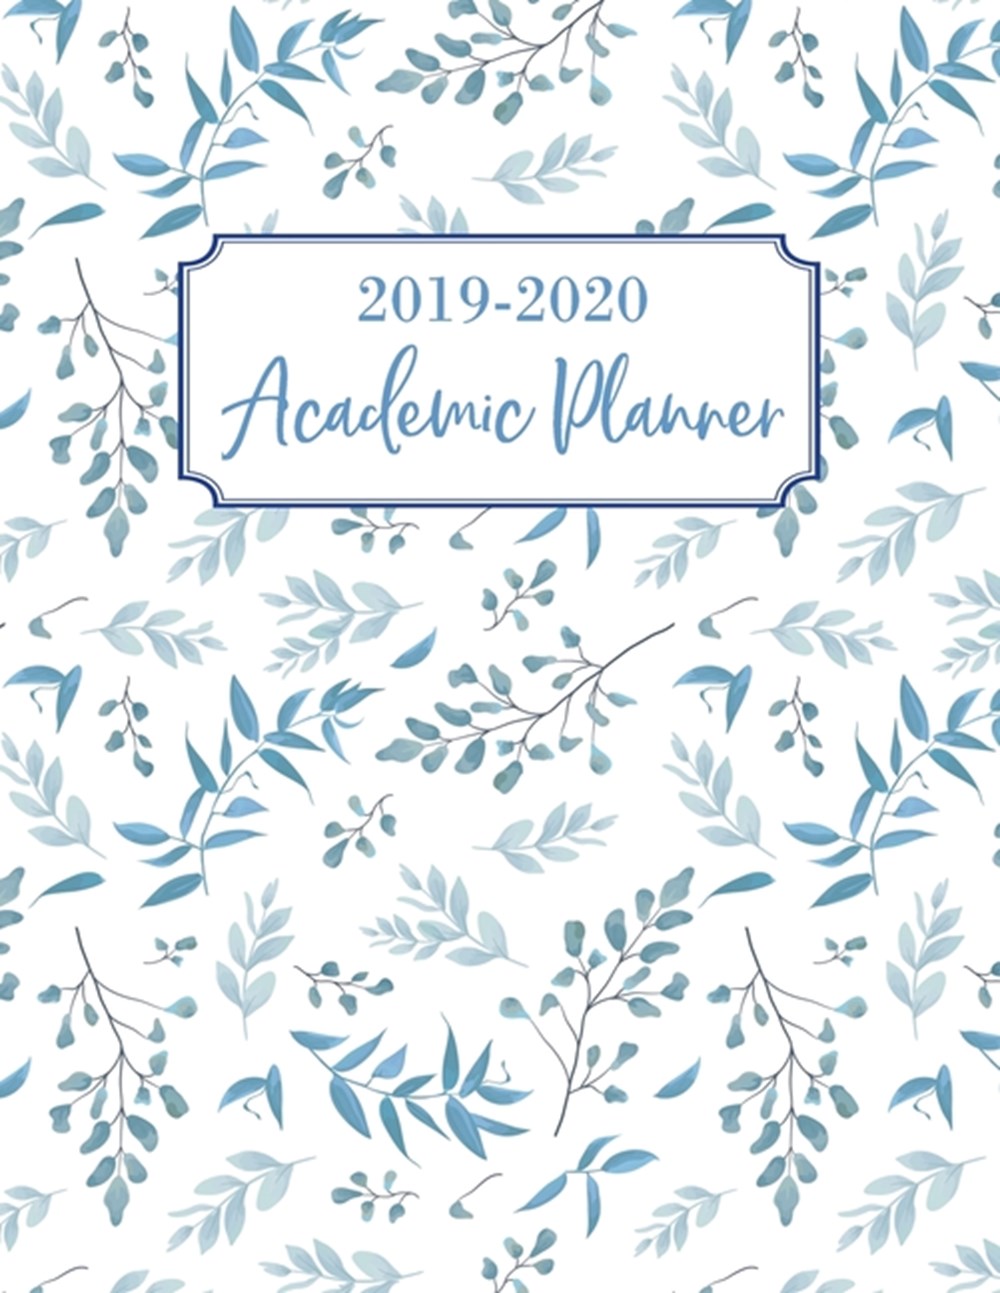 Academic Planner 2019-2020 Academic Year July 2019 - June 2020, 7 Subject Weekly Student Planner + M